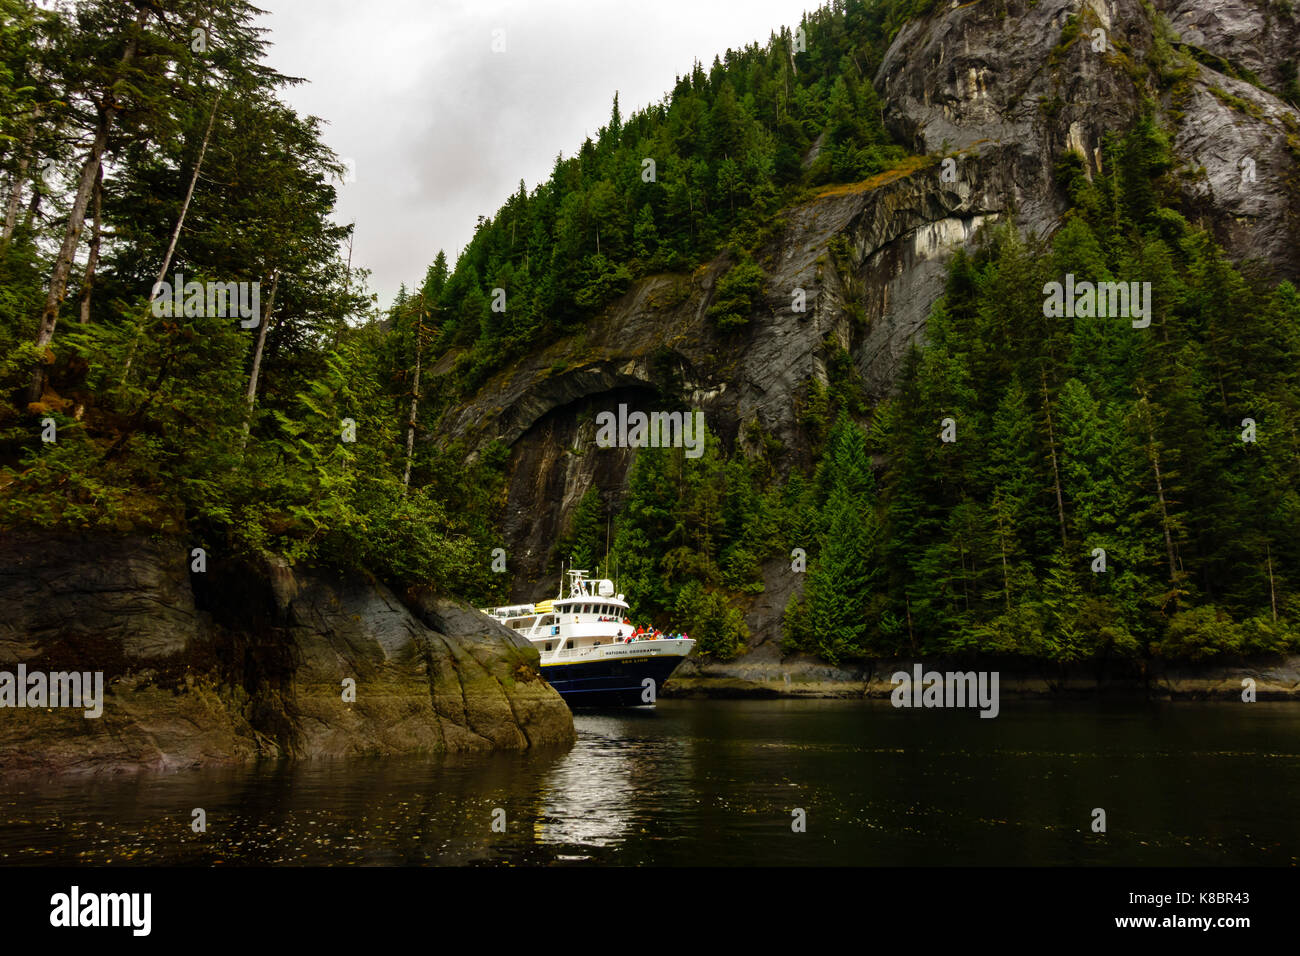 The National Geographic Sea Lion exploring Misty Fjords National Monument, Alaska, USA Stock Photo